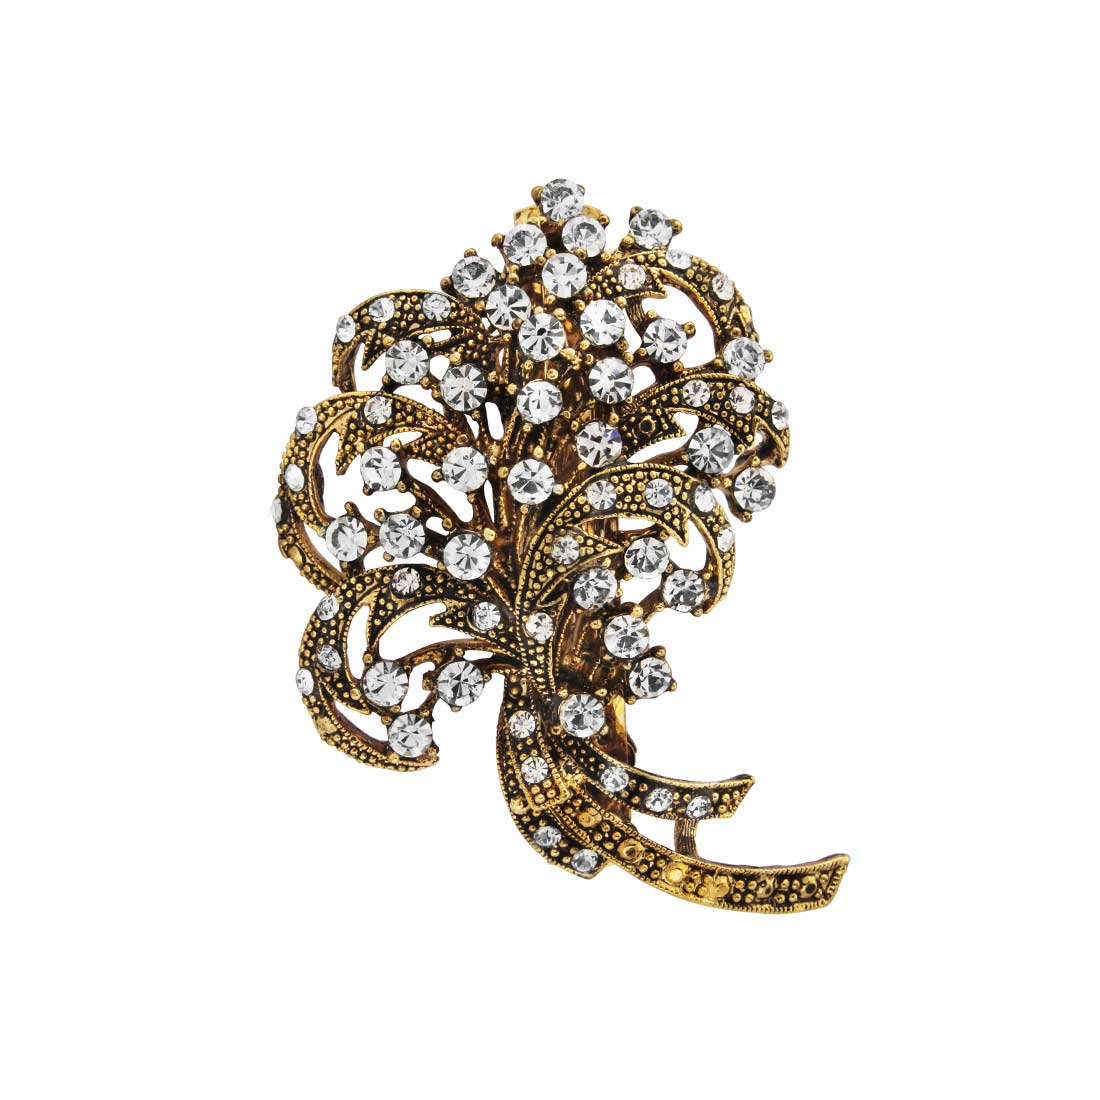 Extravagance of Gold Vintage Crystal Feather Hair Clip